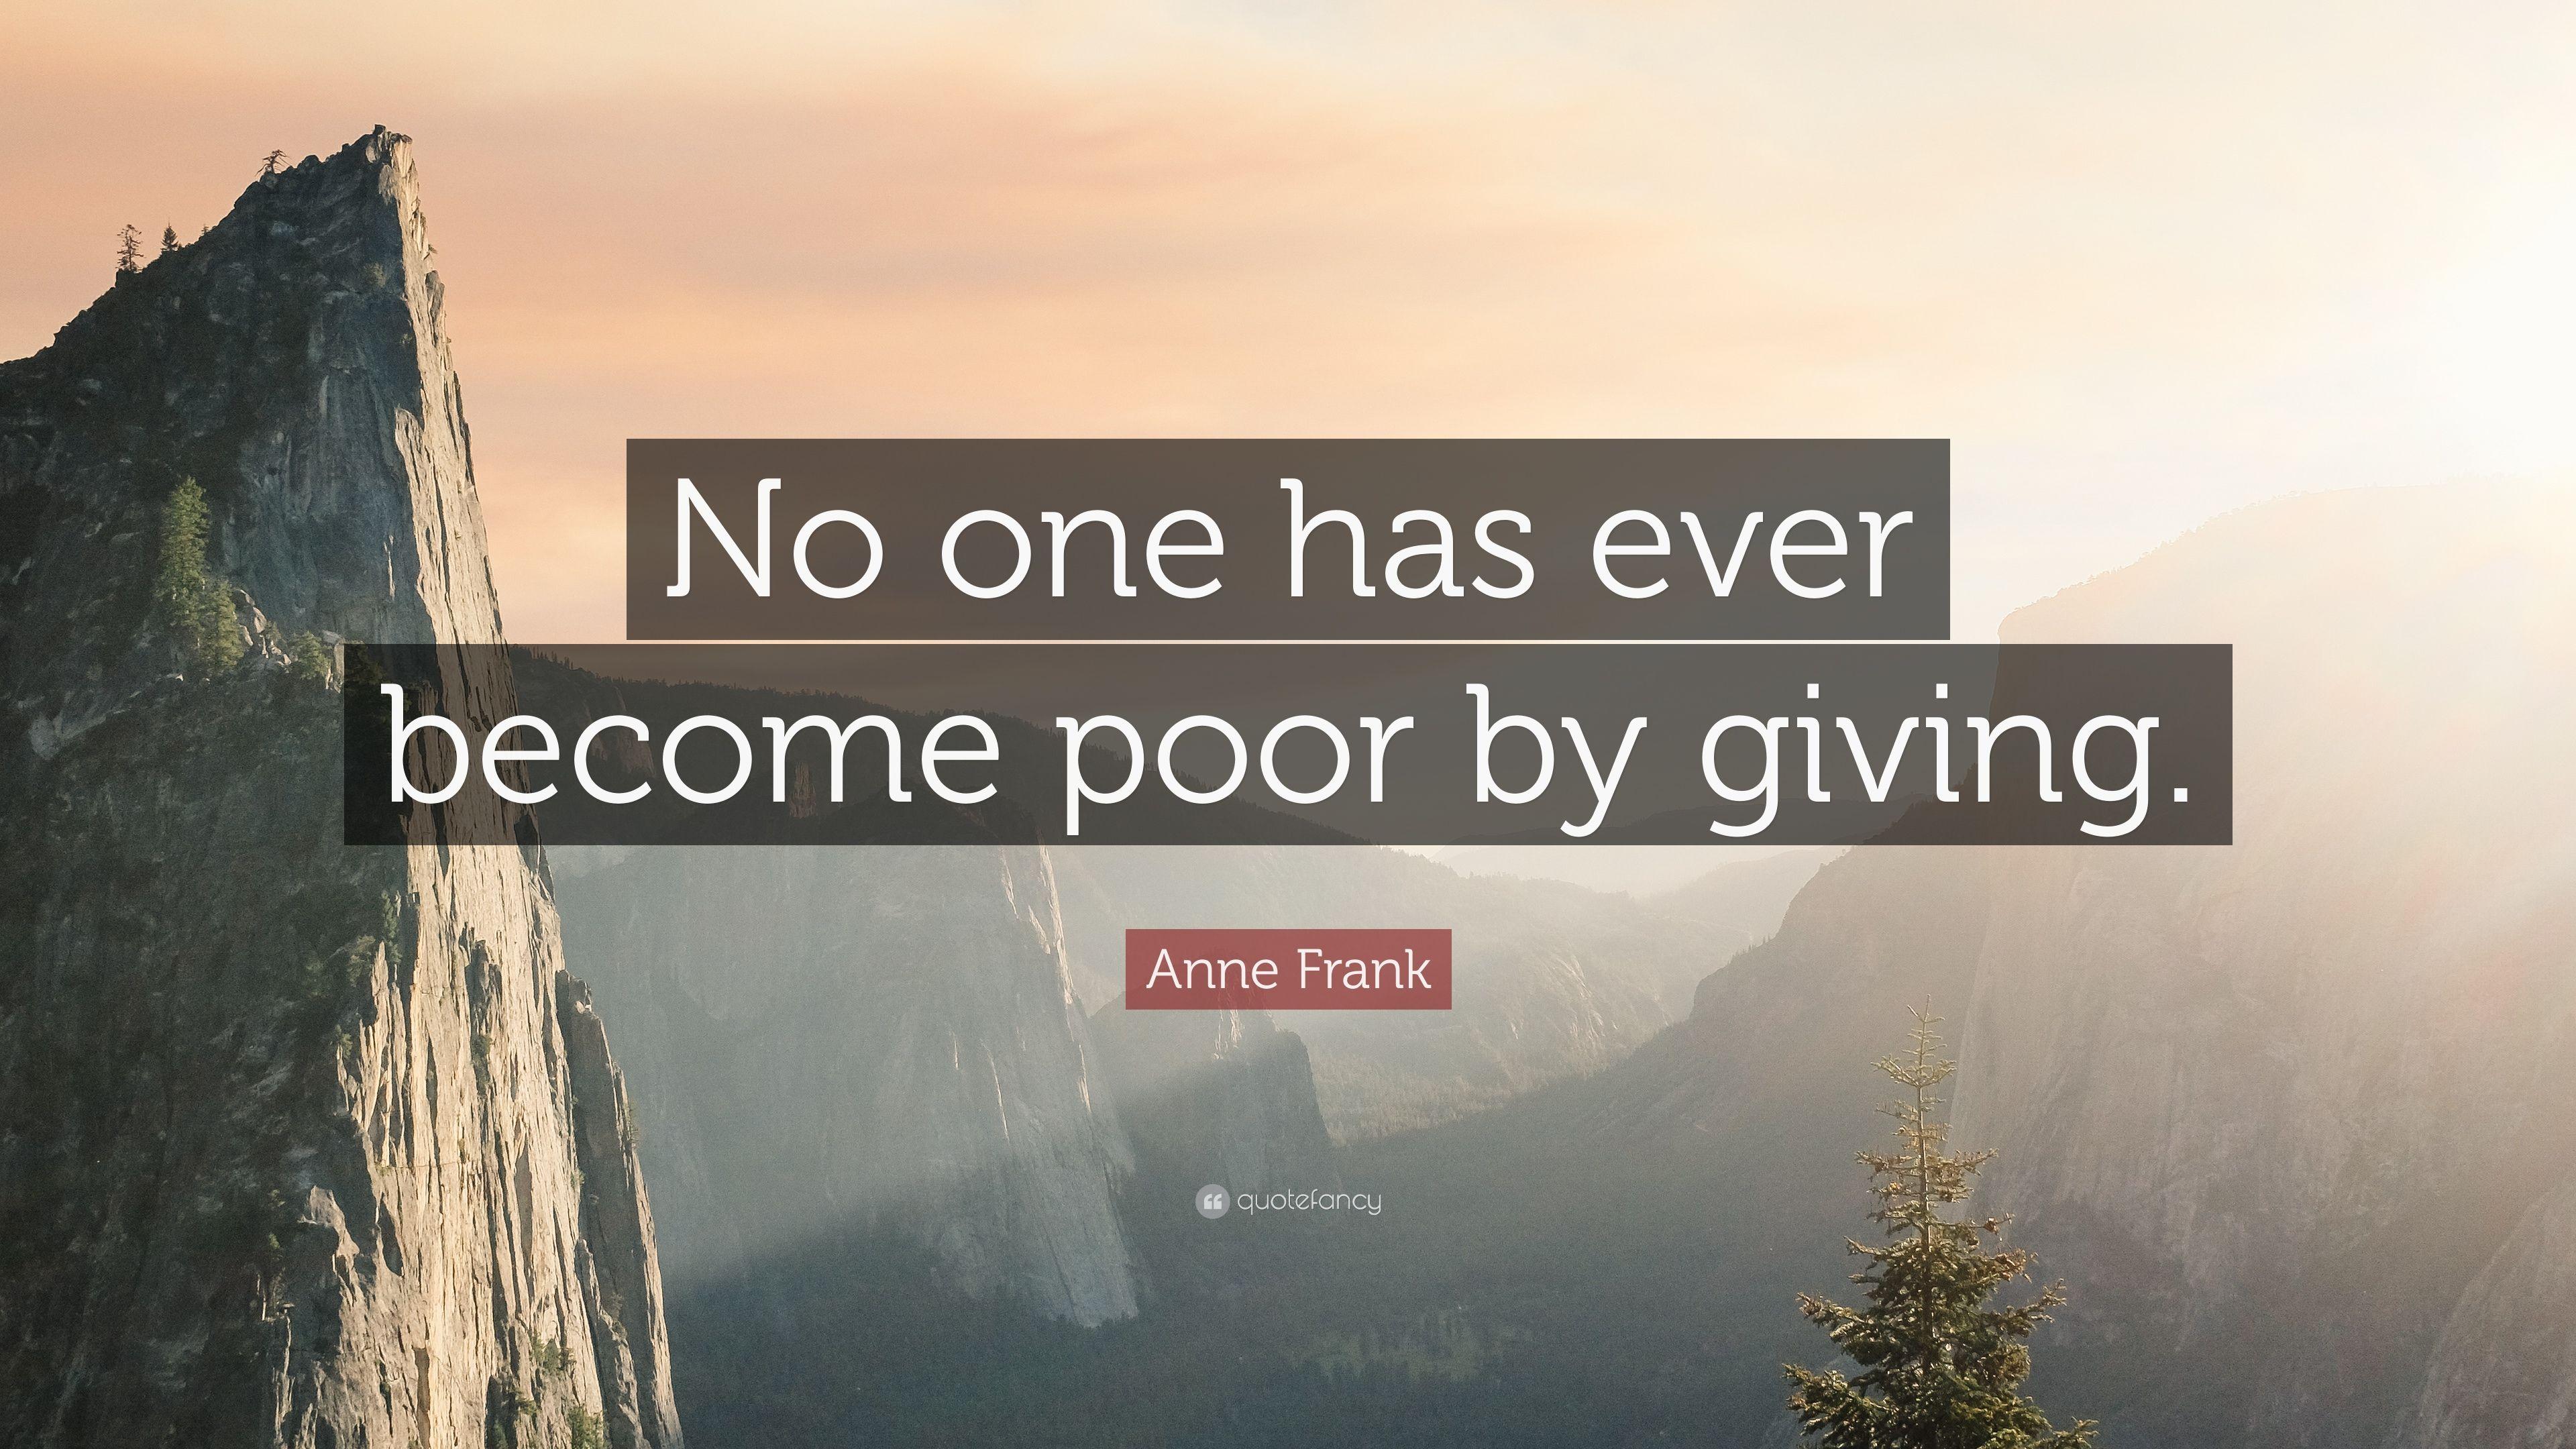 Anne Frank Quote: “No one has ever become poor by giving.” 17